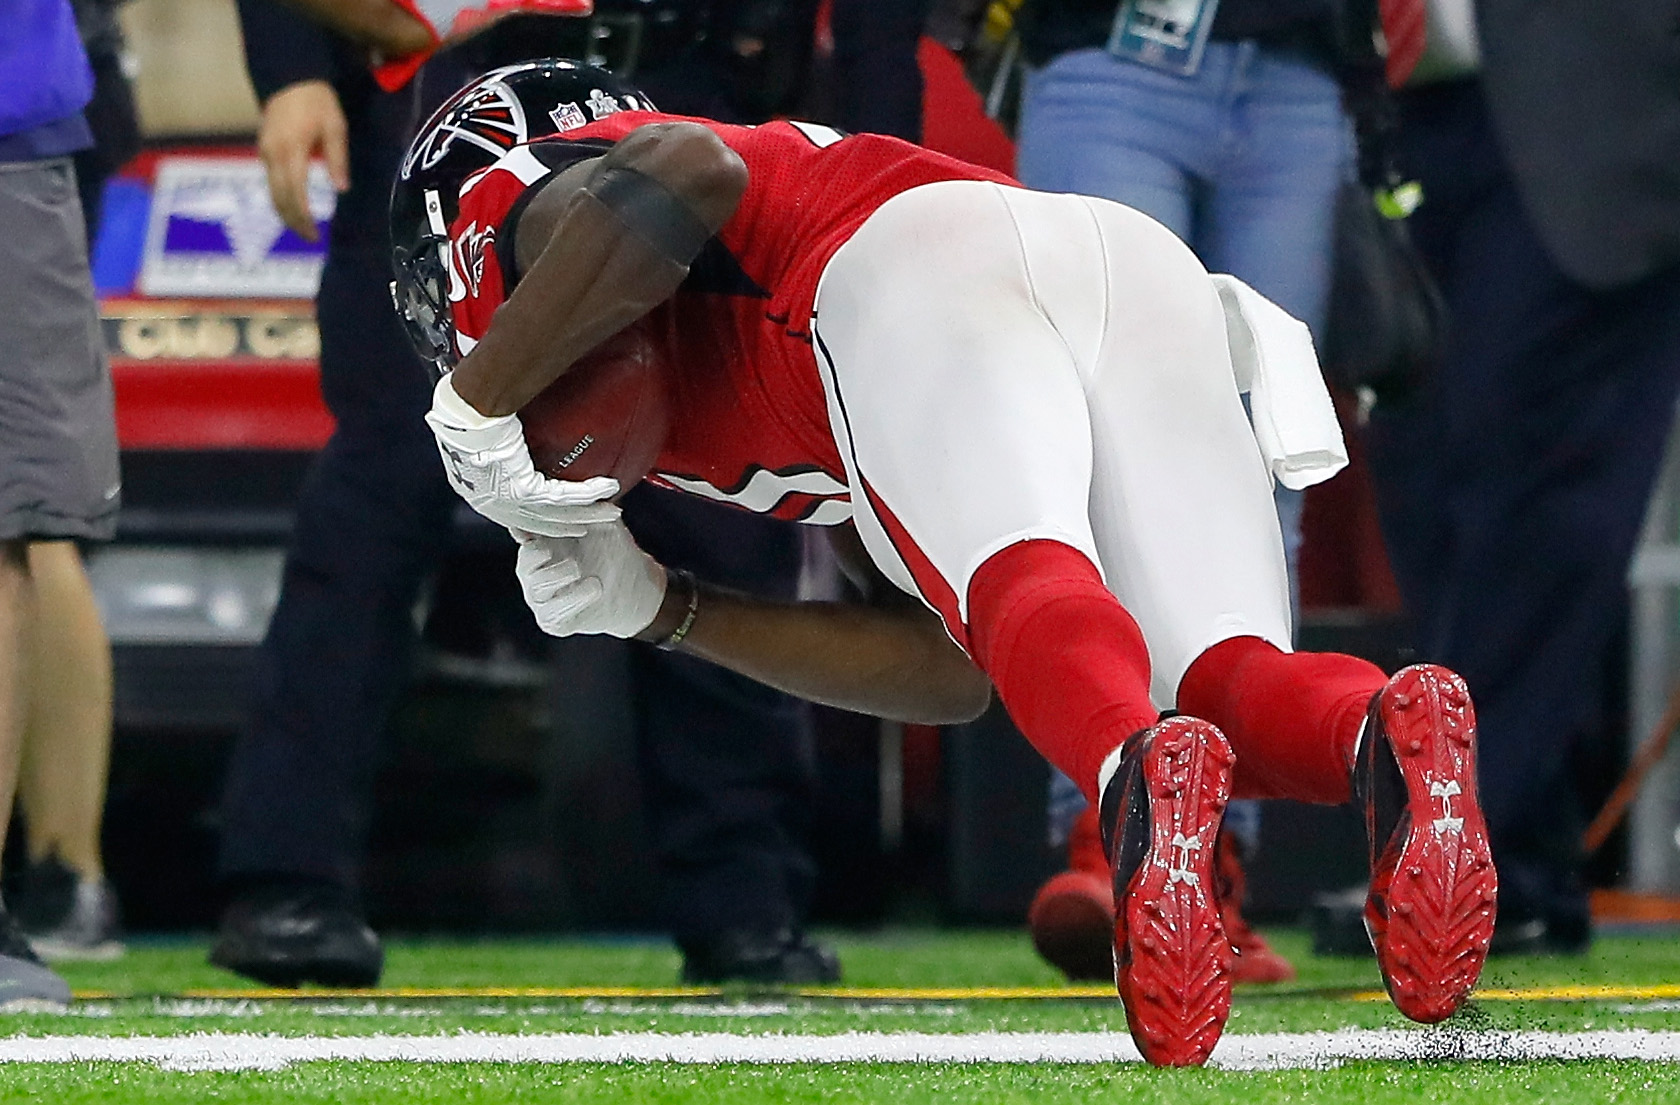 HOUSTON, TX - FEBRUARY 05: Julio Jones #11 of the Atlanta Falcons makes a catch during the fourth quarter against the New England Patriots  during Super Bowl 51 at NRG Stadium on February 5, 2017 in Houston, Texas.  (Photo by Kevin C. Cox/Getty Images)